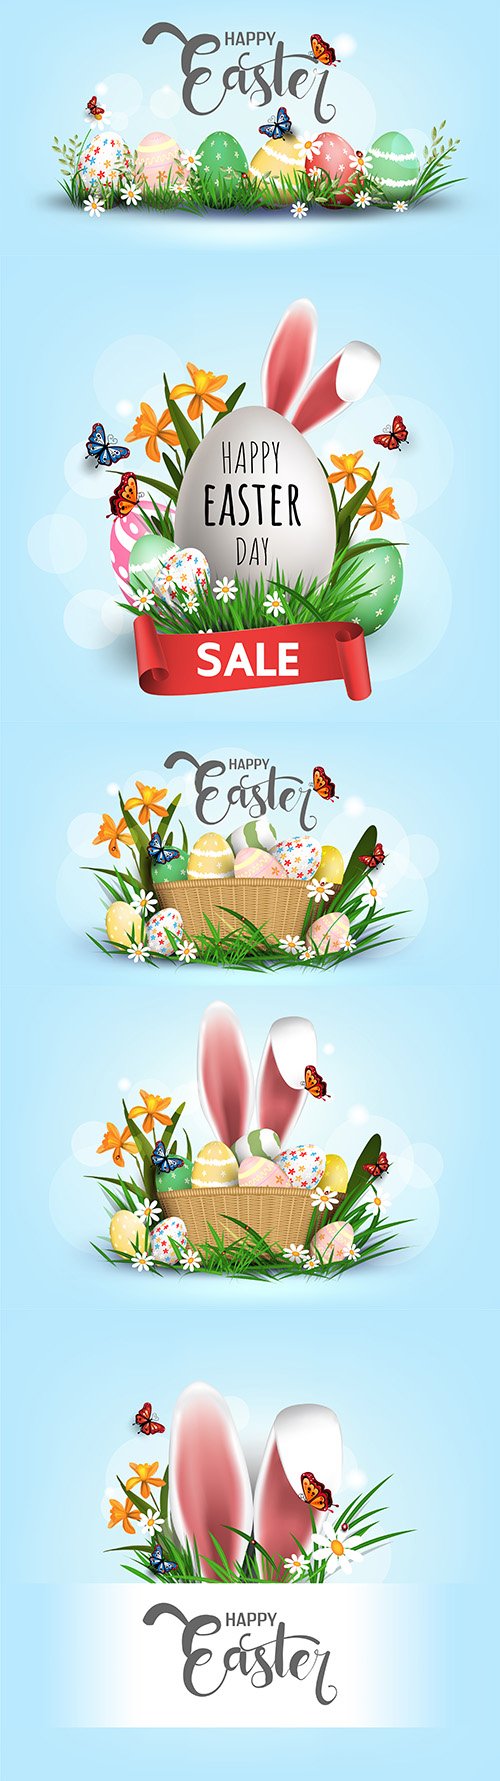 Happy Easter eggs in green grass with white flowers design